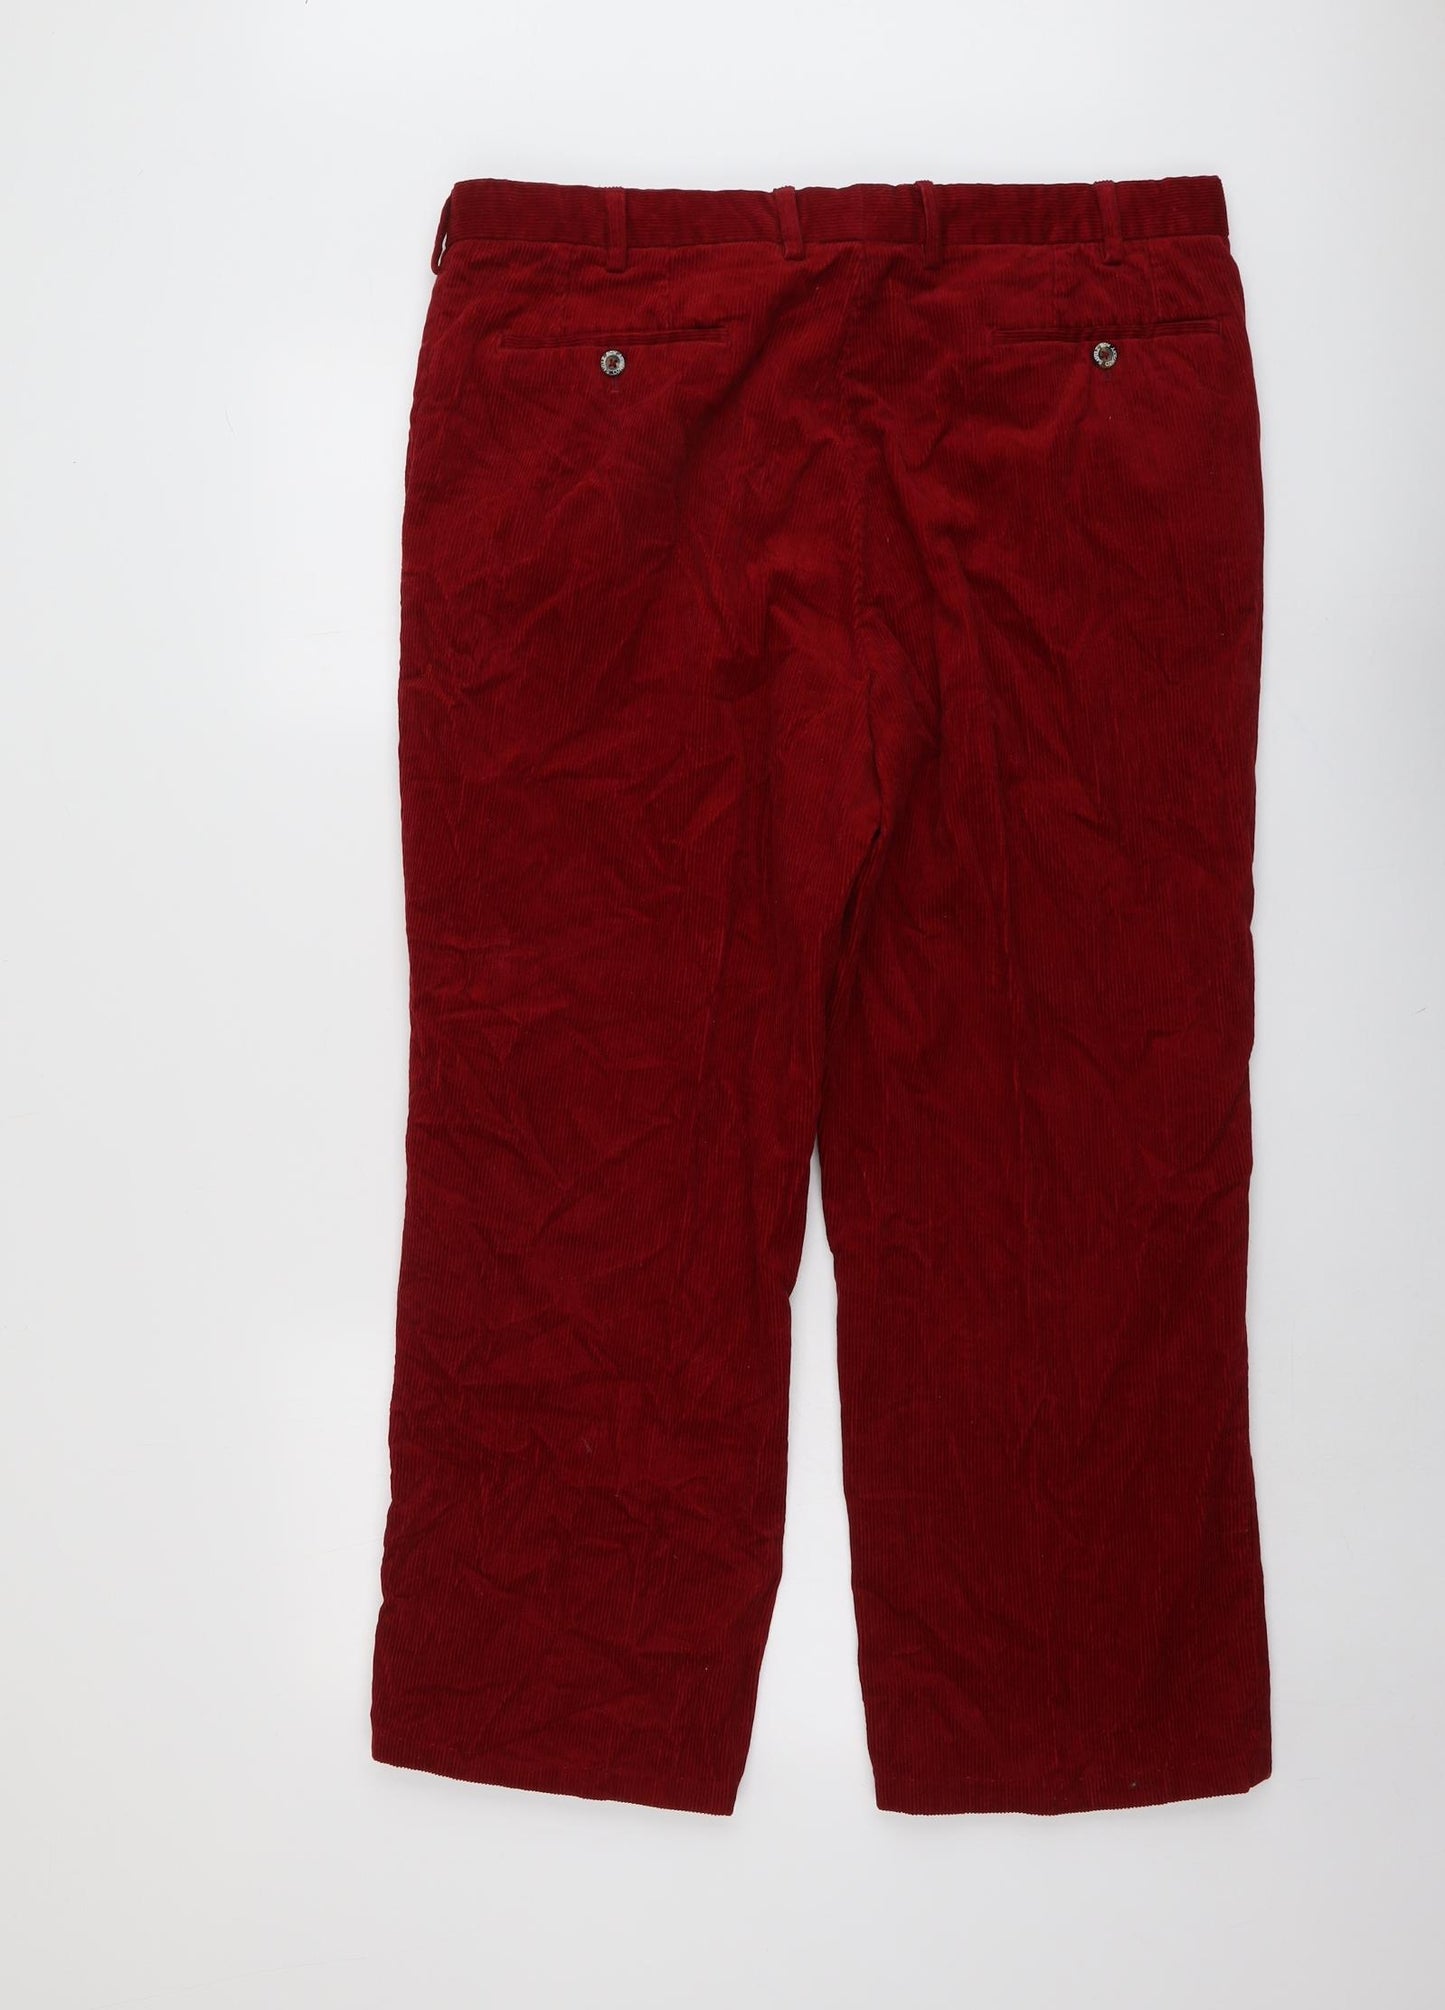 Savile Row Mens Red Cotton Trousers Size 38 in L32 in Regular Button